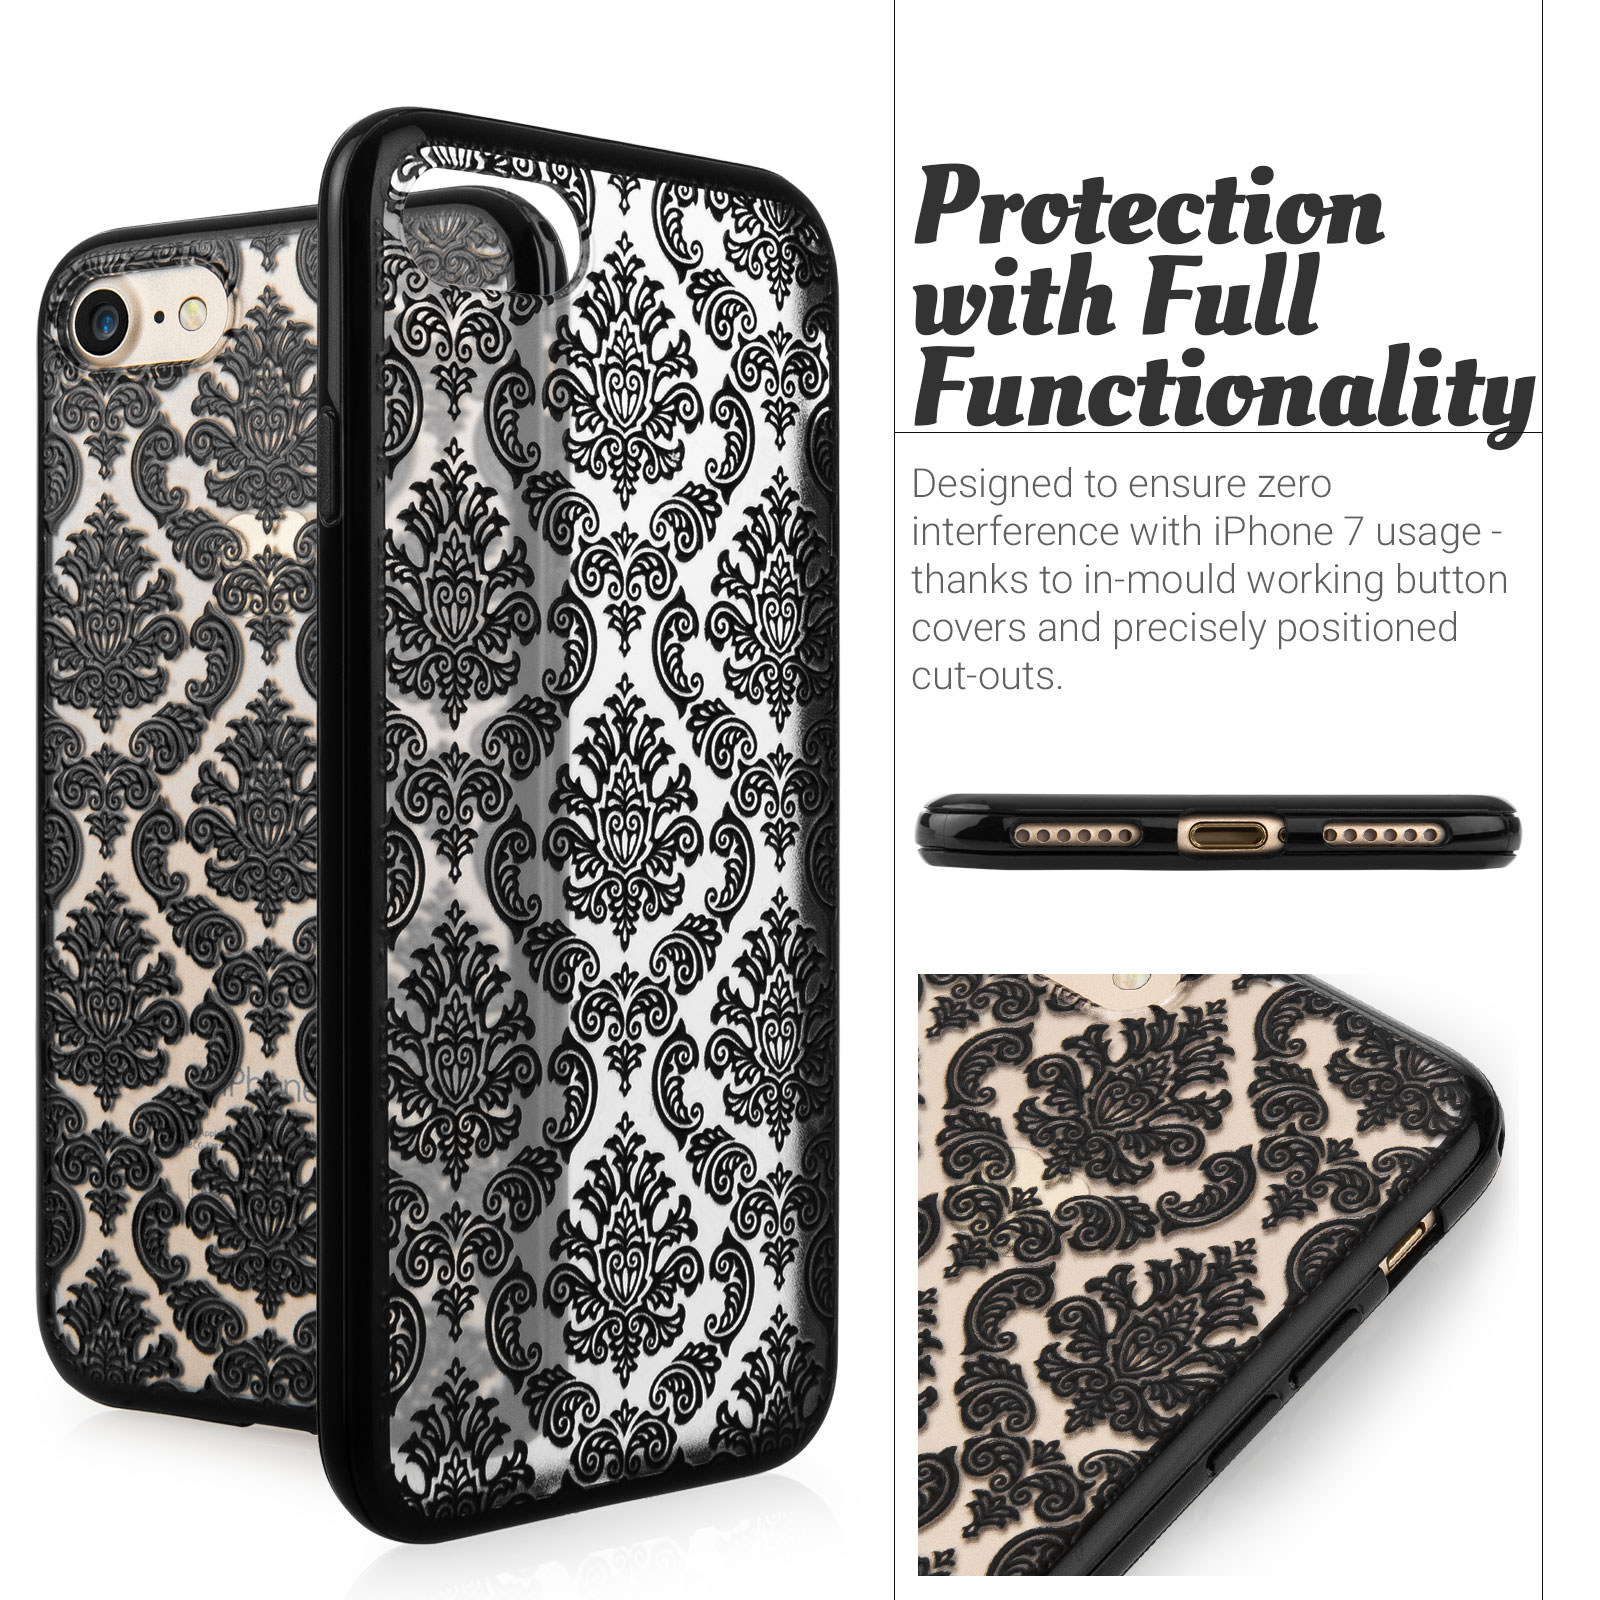 YouSave Accessories iPhone 7 Hard Case - Damask Black